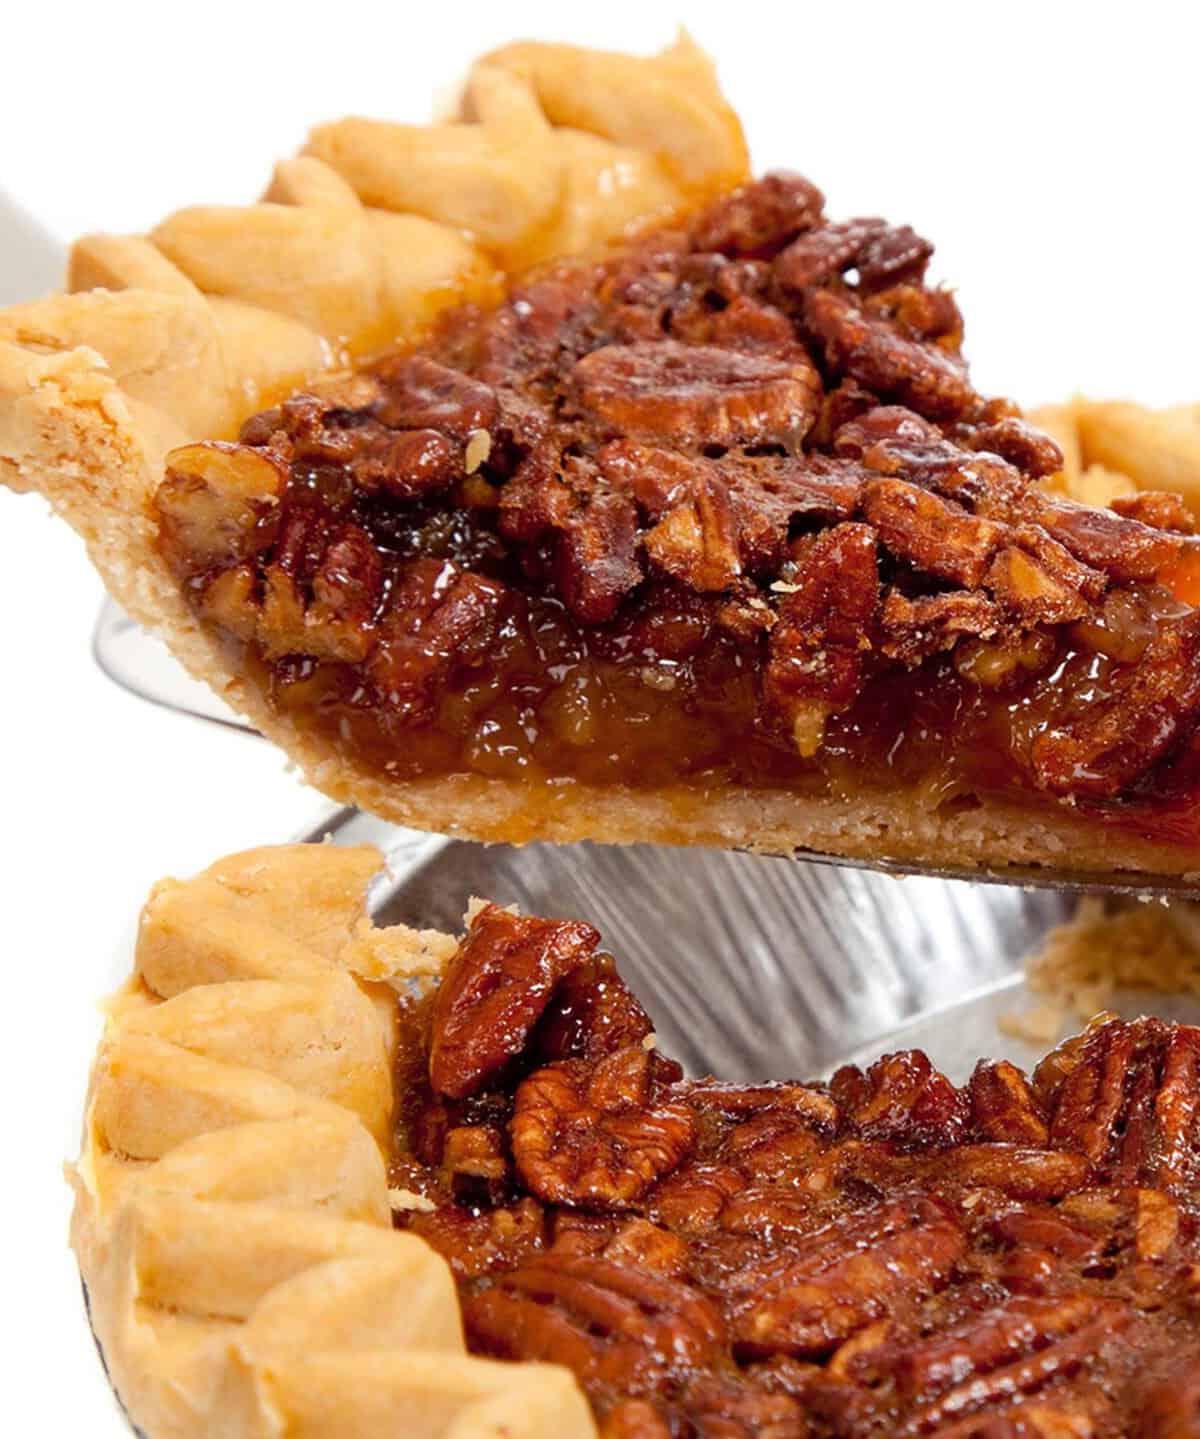  Who says pecan pie is just for holidays? Enjoy this sweet treat year-round!